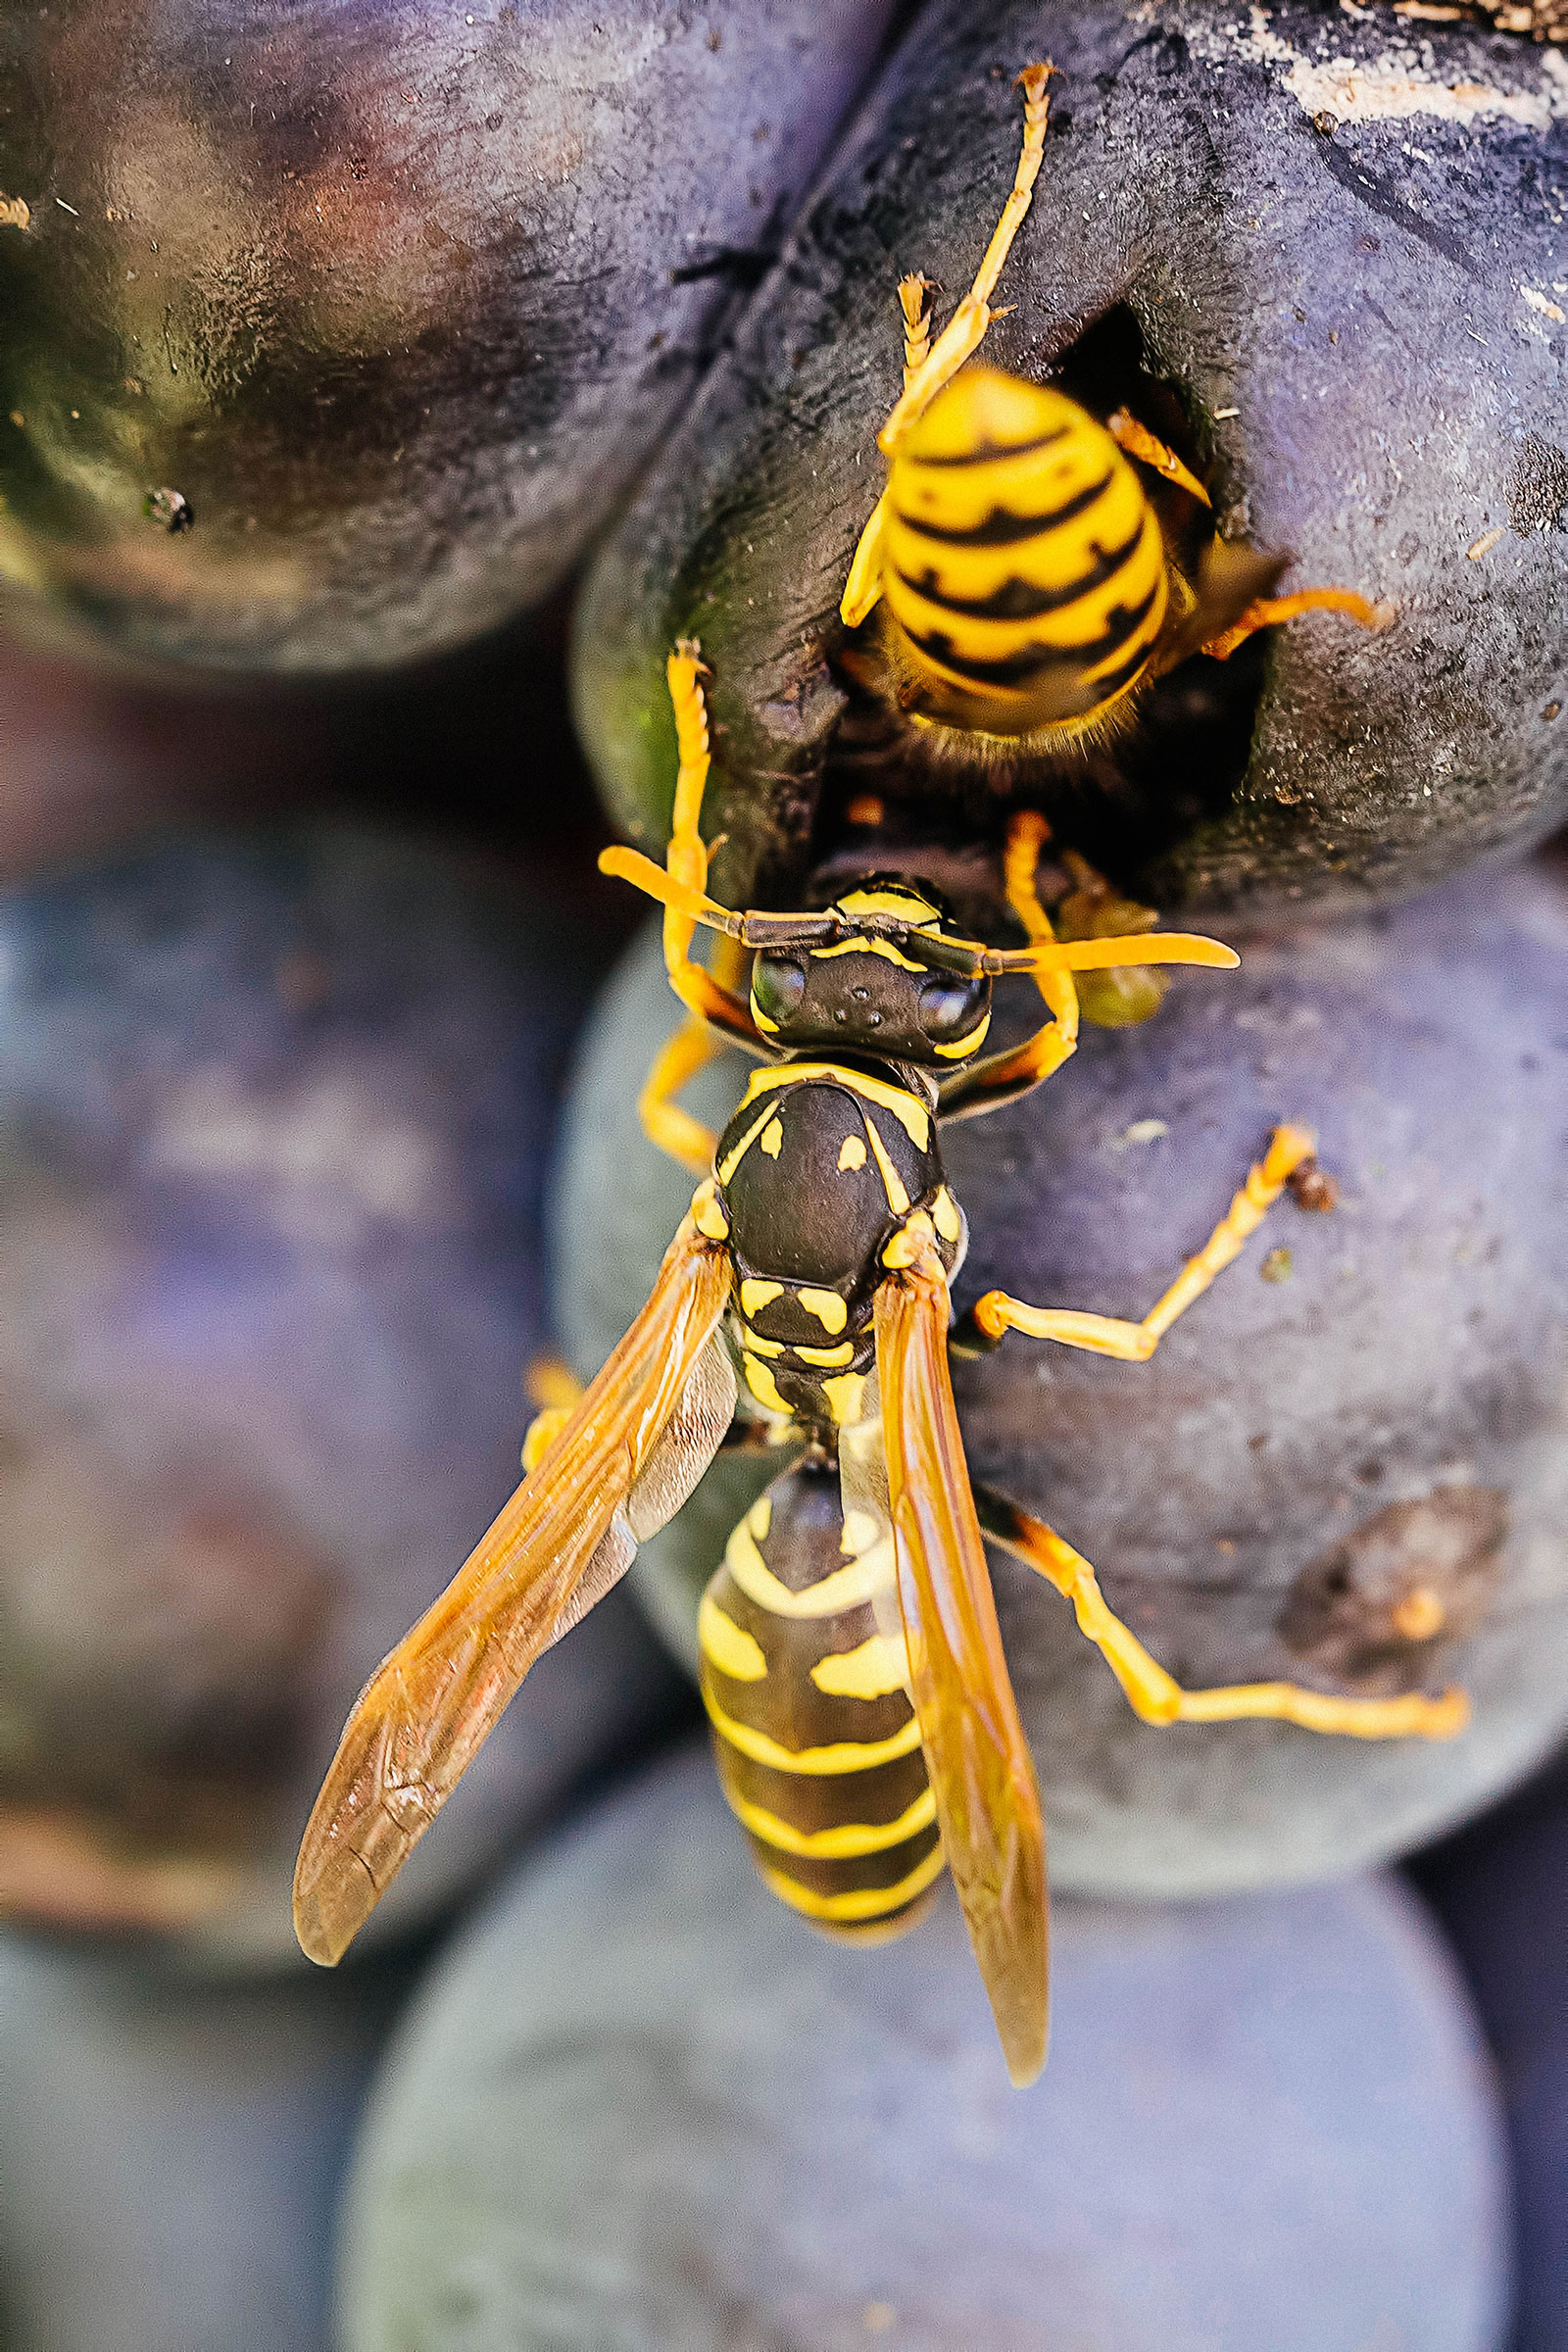 Easy wasp identification: a visual guide to common types of wasps